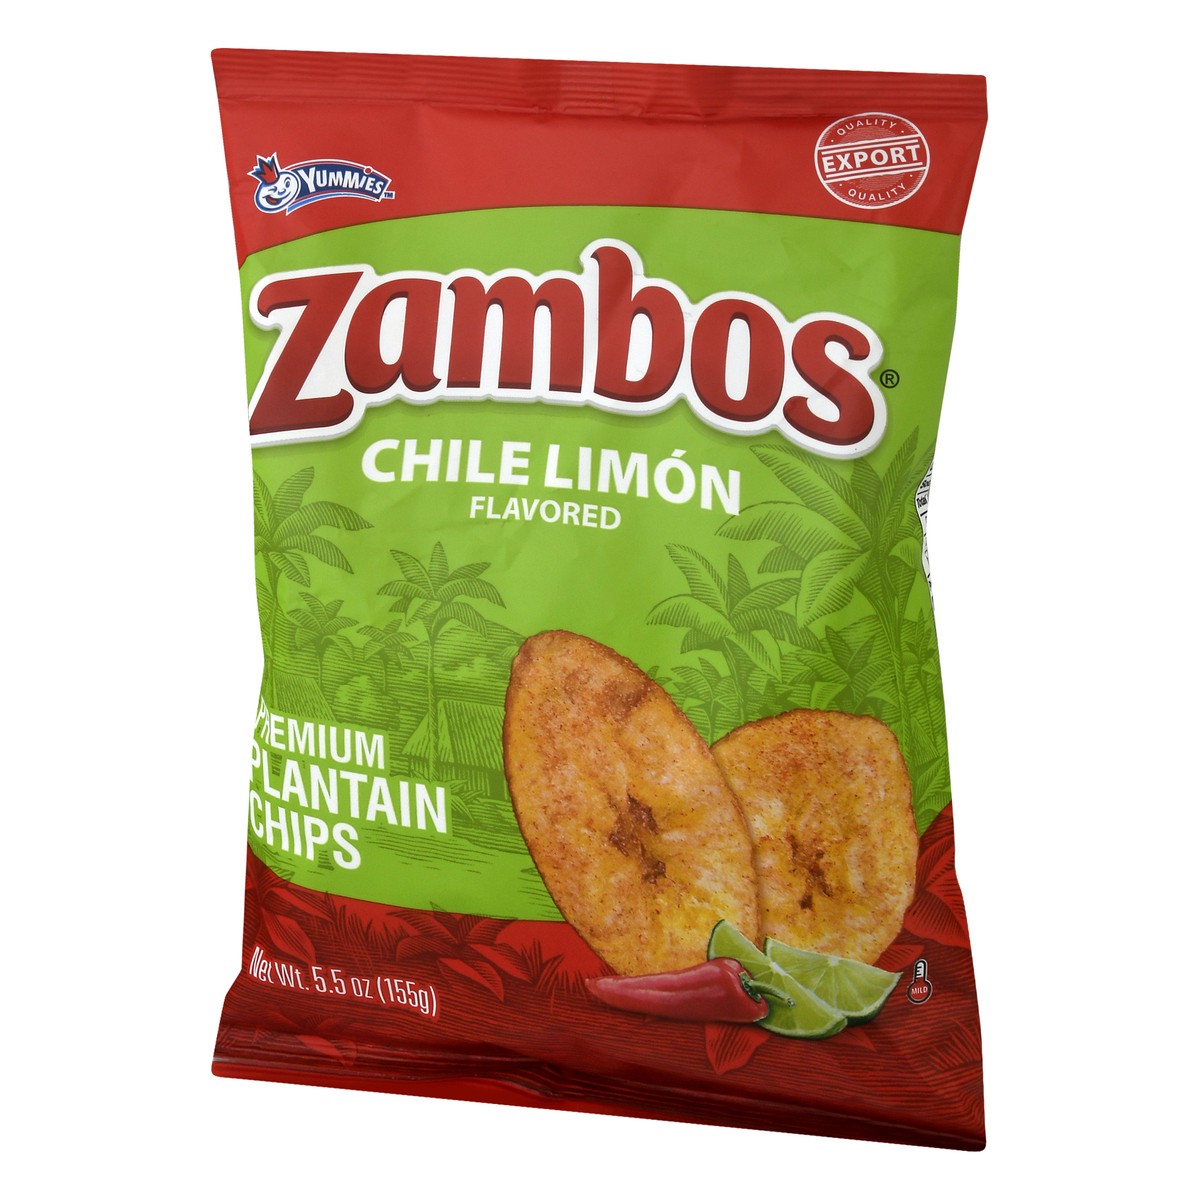 slide 3 of 10, Zambos Chile Limon Flavored Plantain Chips 5.5 oz, 